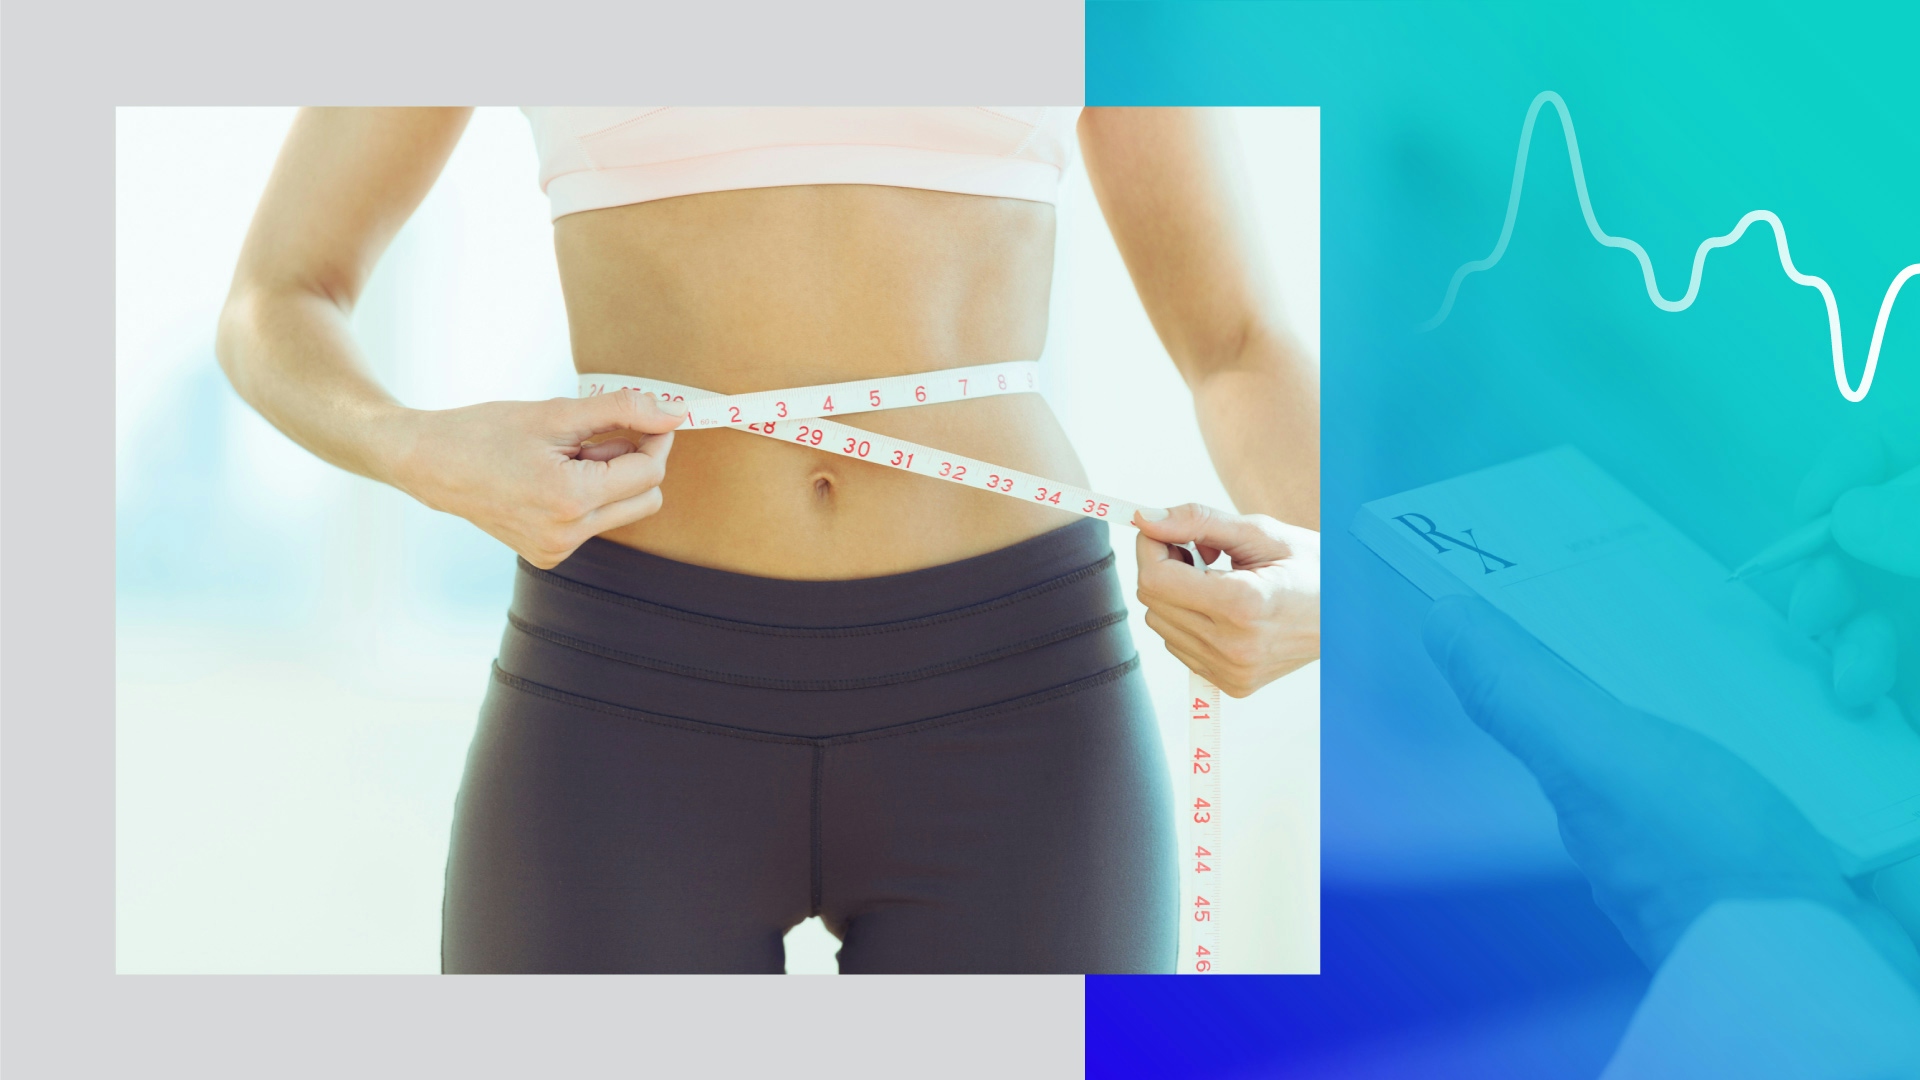 Graphic with image of a person in fitness gear measuring their waist and a doctor writing on a prescription pad